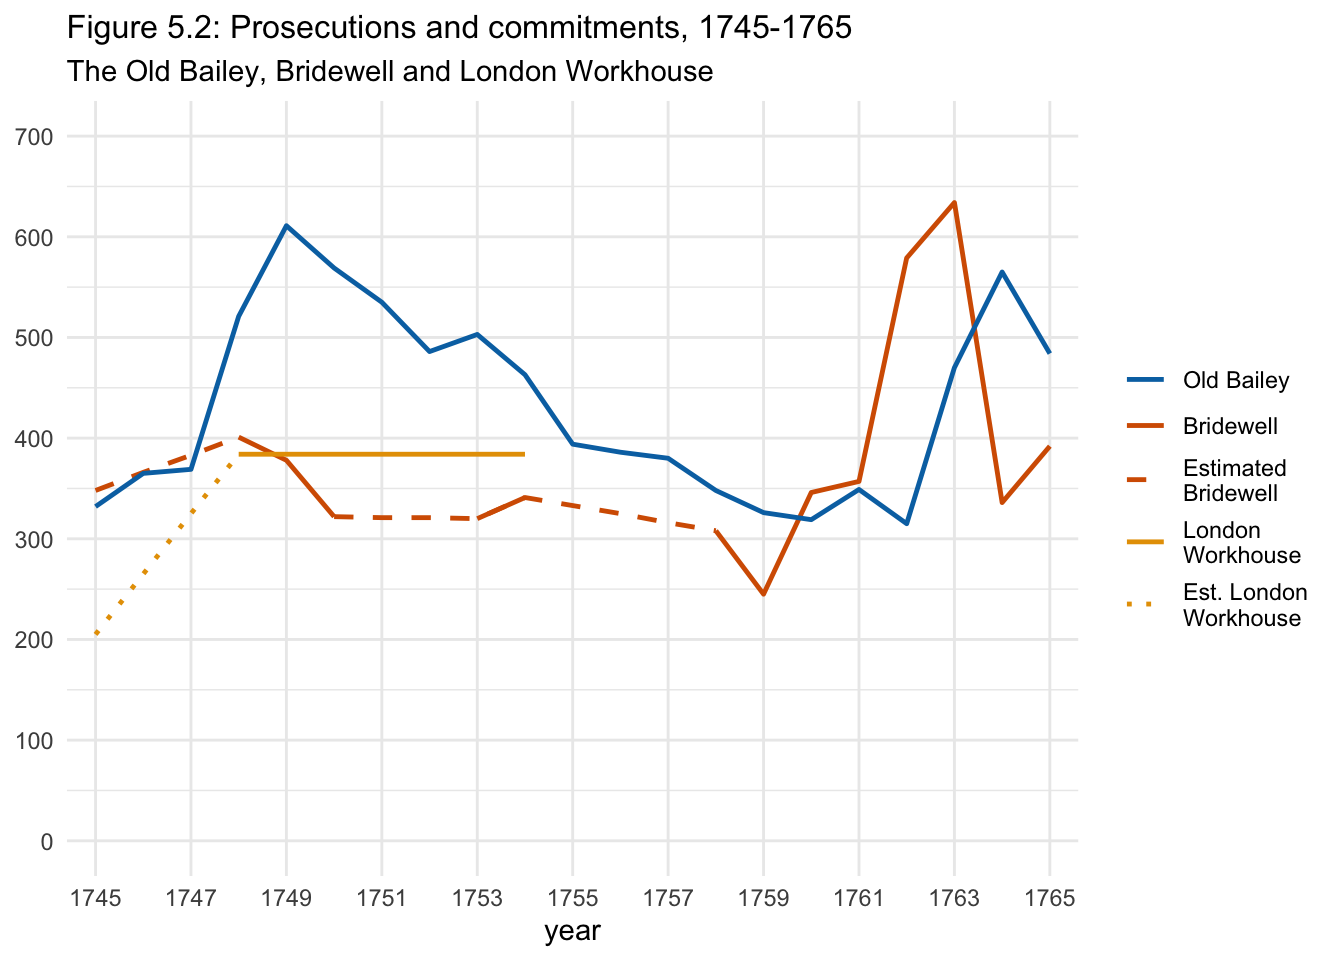 Figure 5.2: Prosecutions and commitments, 1745-1765: The Old Bailey, Bridewell and London Workhouse